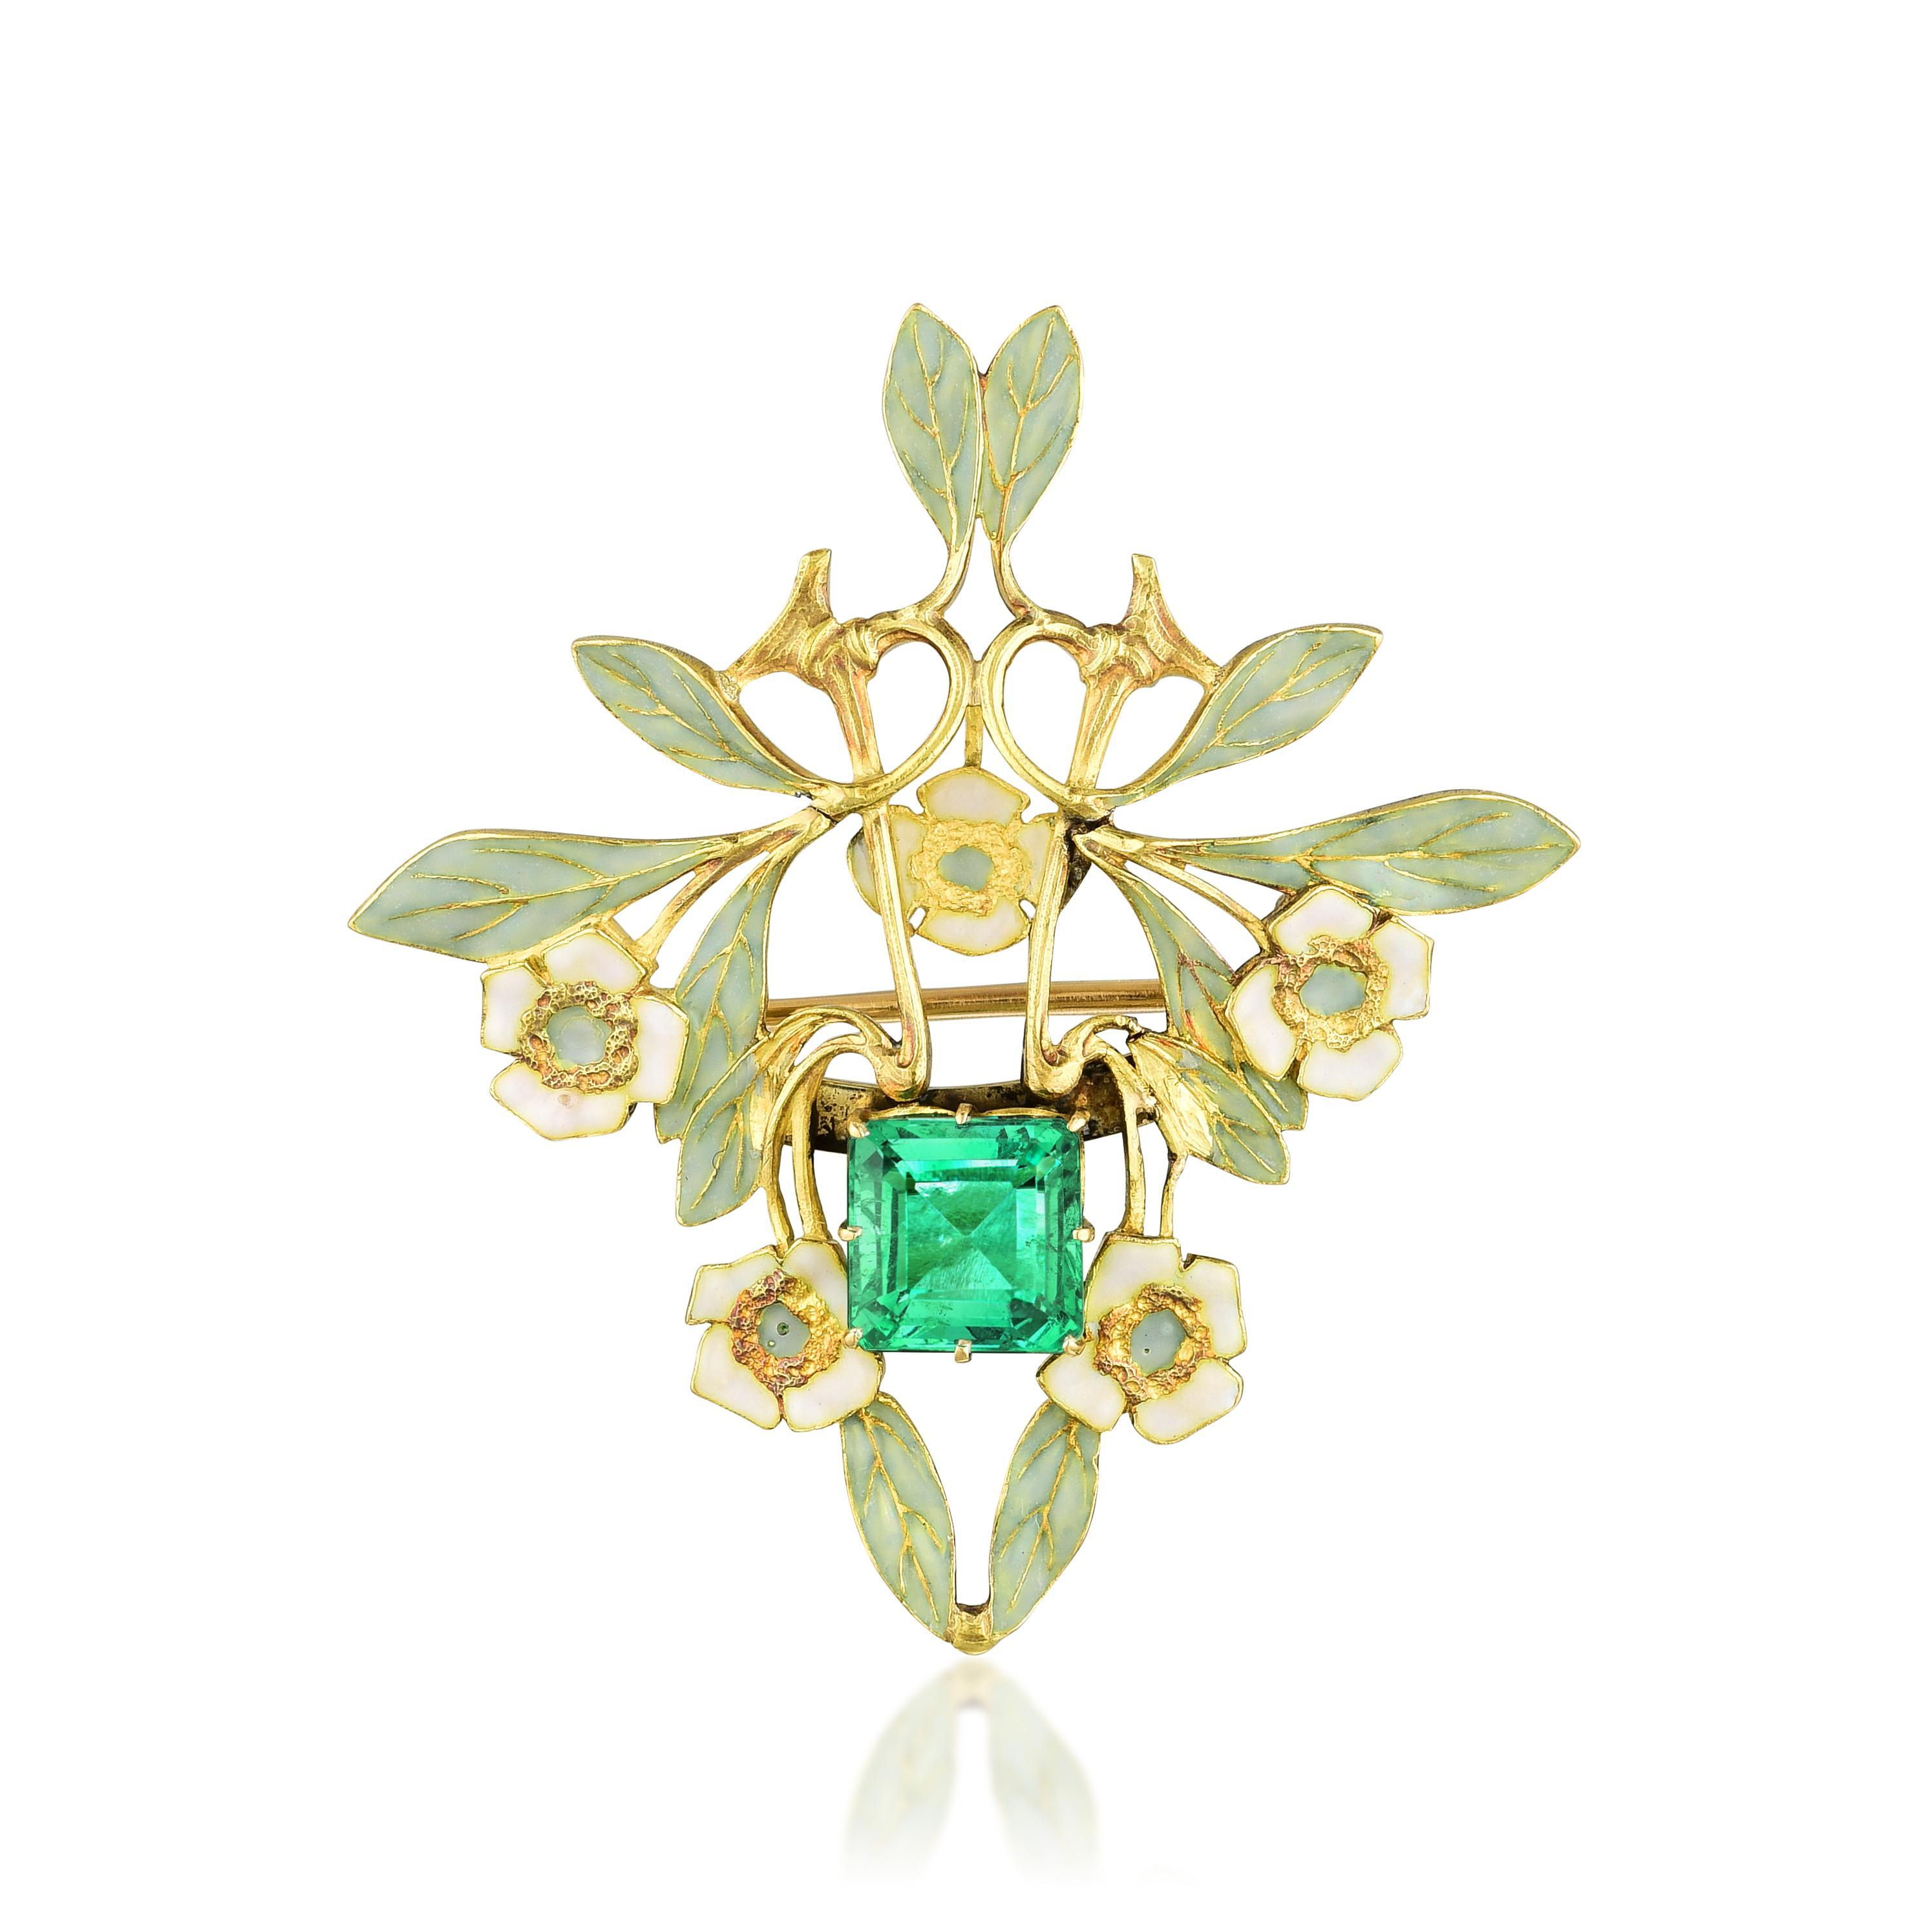 The Jewelry of Art Nouveau | Fortuna Auction in NYC